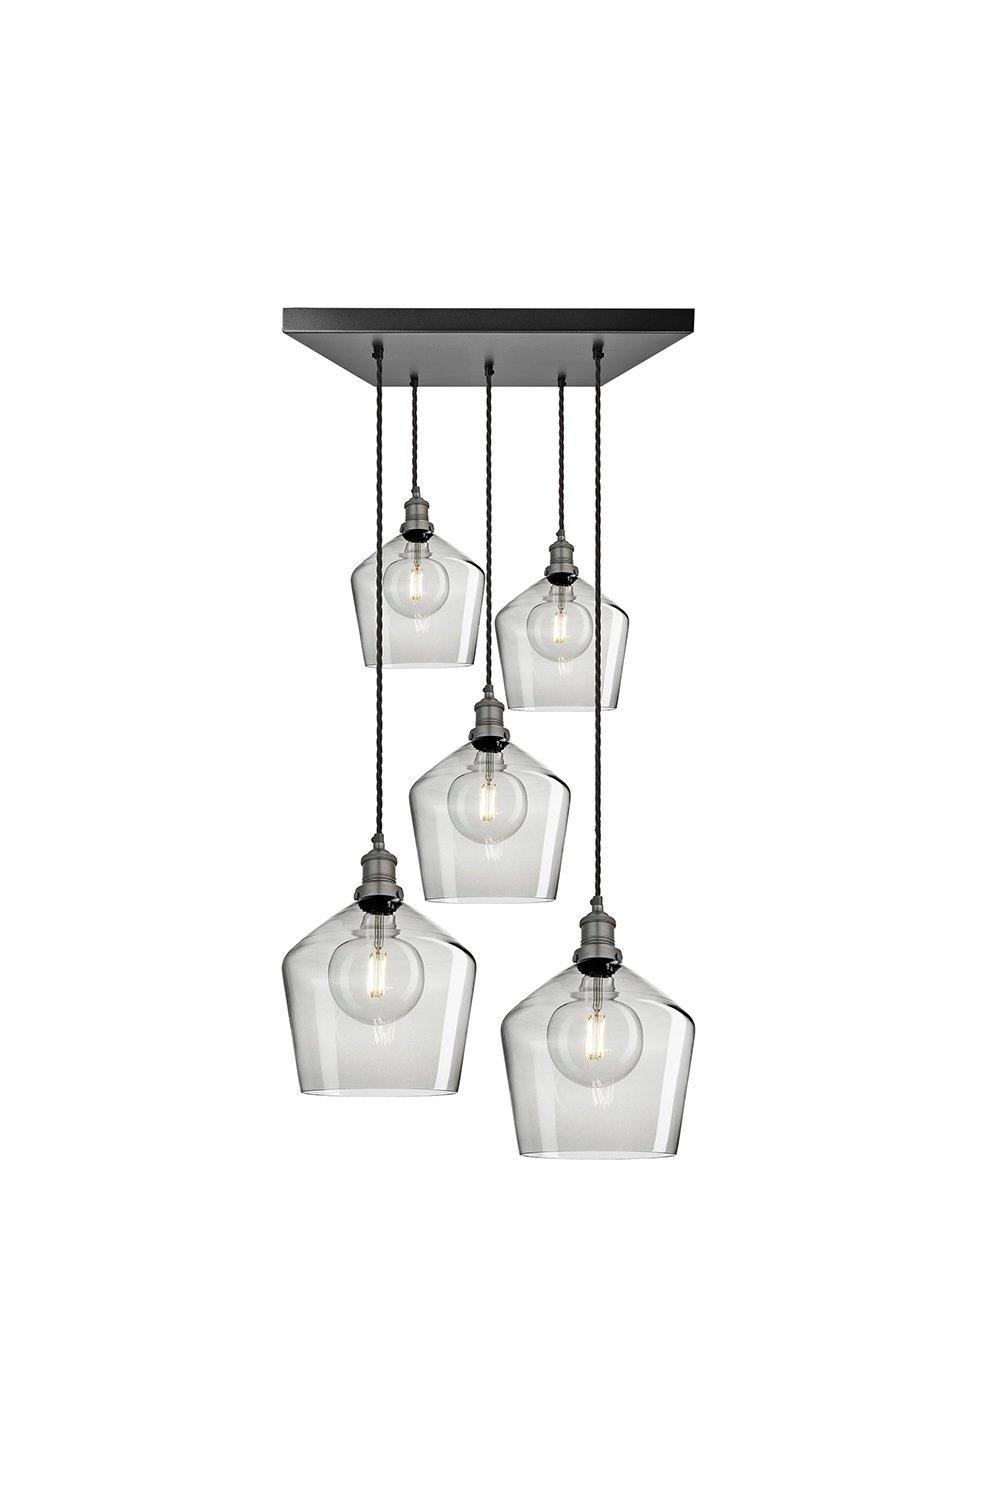 Brooklyn Tinted Glass Schoolhouse 5 Wire Square Cluster Lights, 10 inch, Smoke Grey, Pewter holder